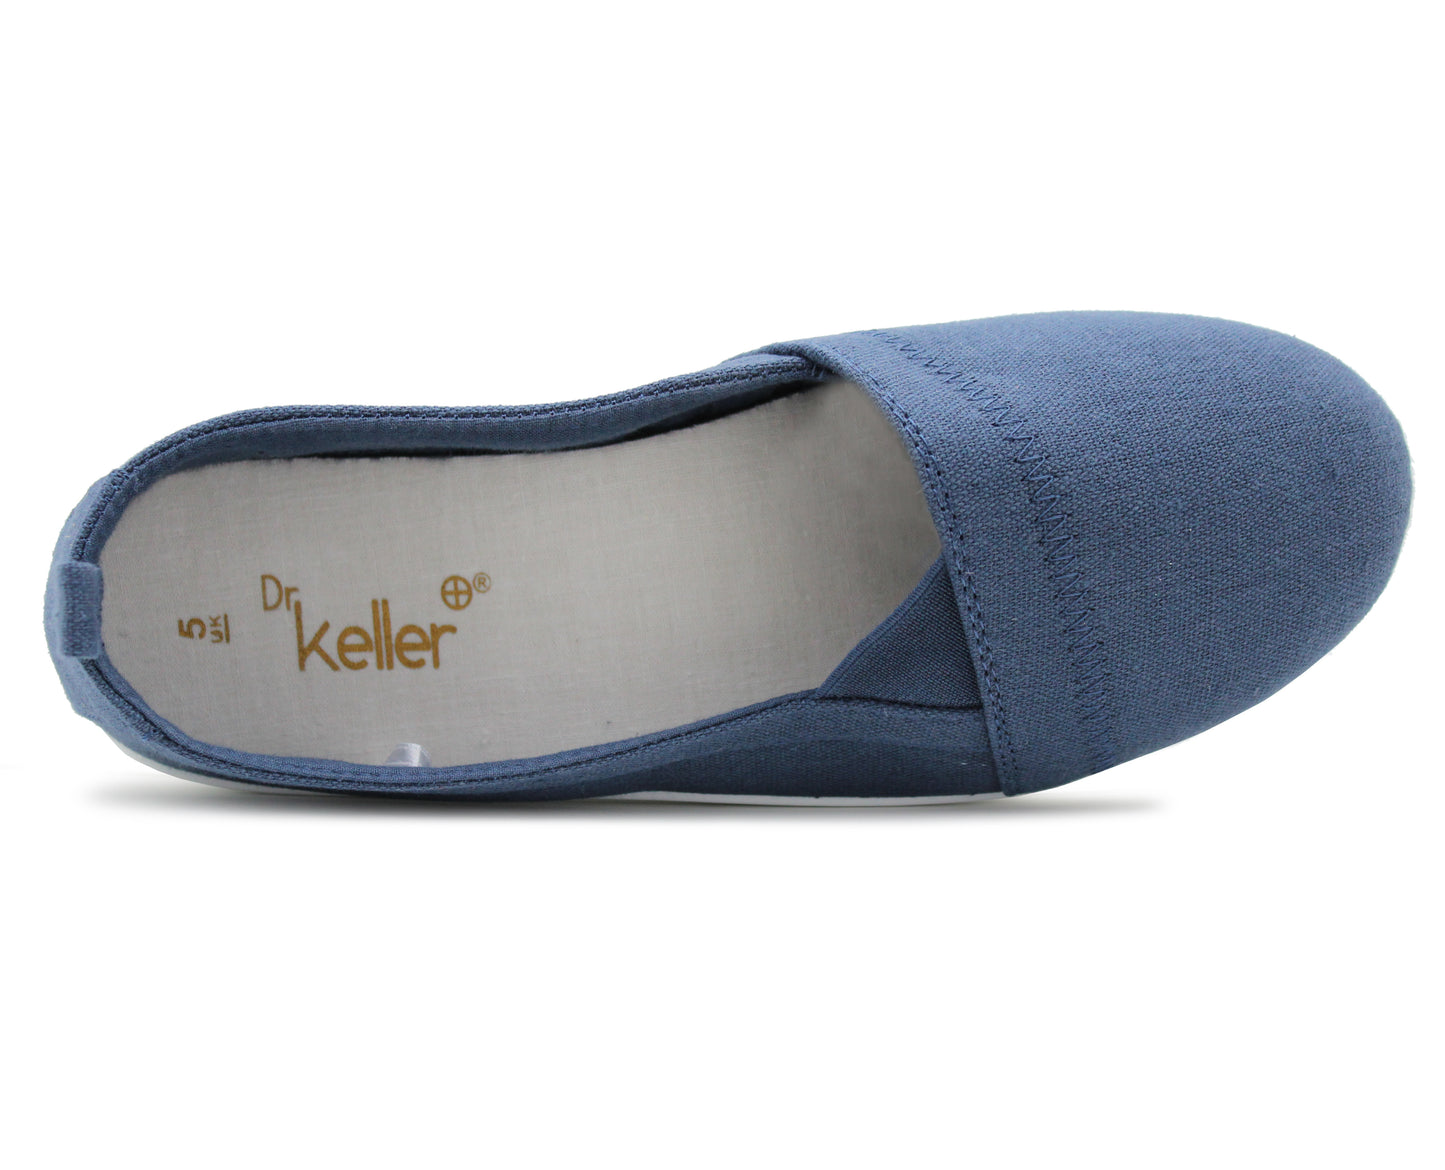 Womens Navy Canvas Slip On Plimsolls Flat Pumps Casual Espadrilles Loafer Trainers